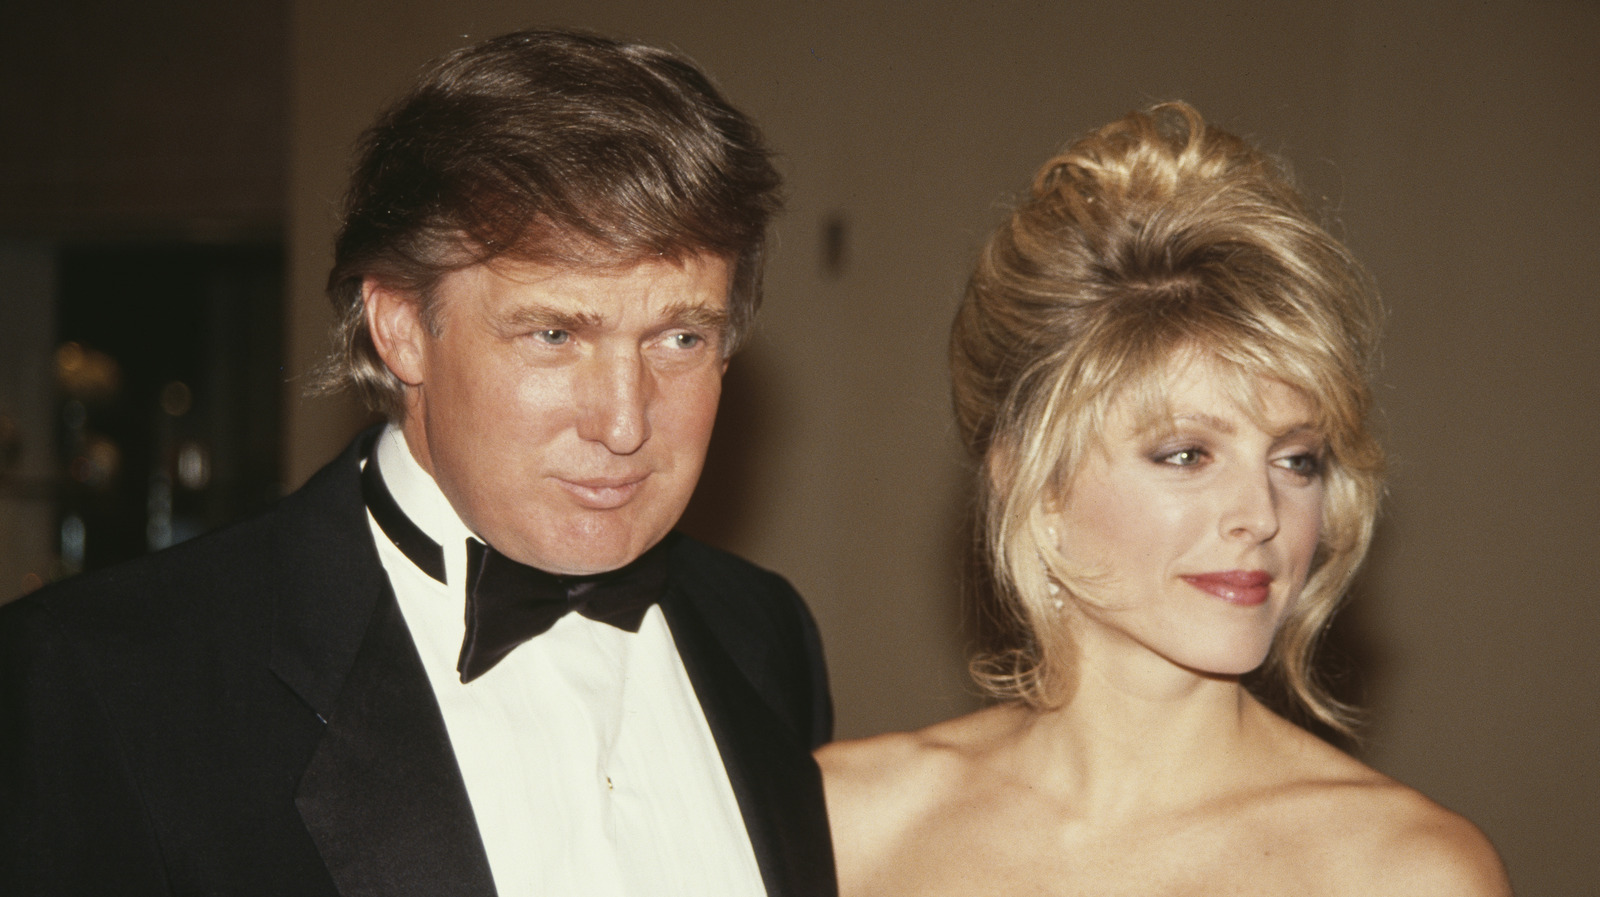 Scandalous Details About Donald Trump And Marla Maples' Marriage